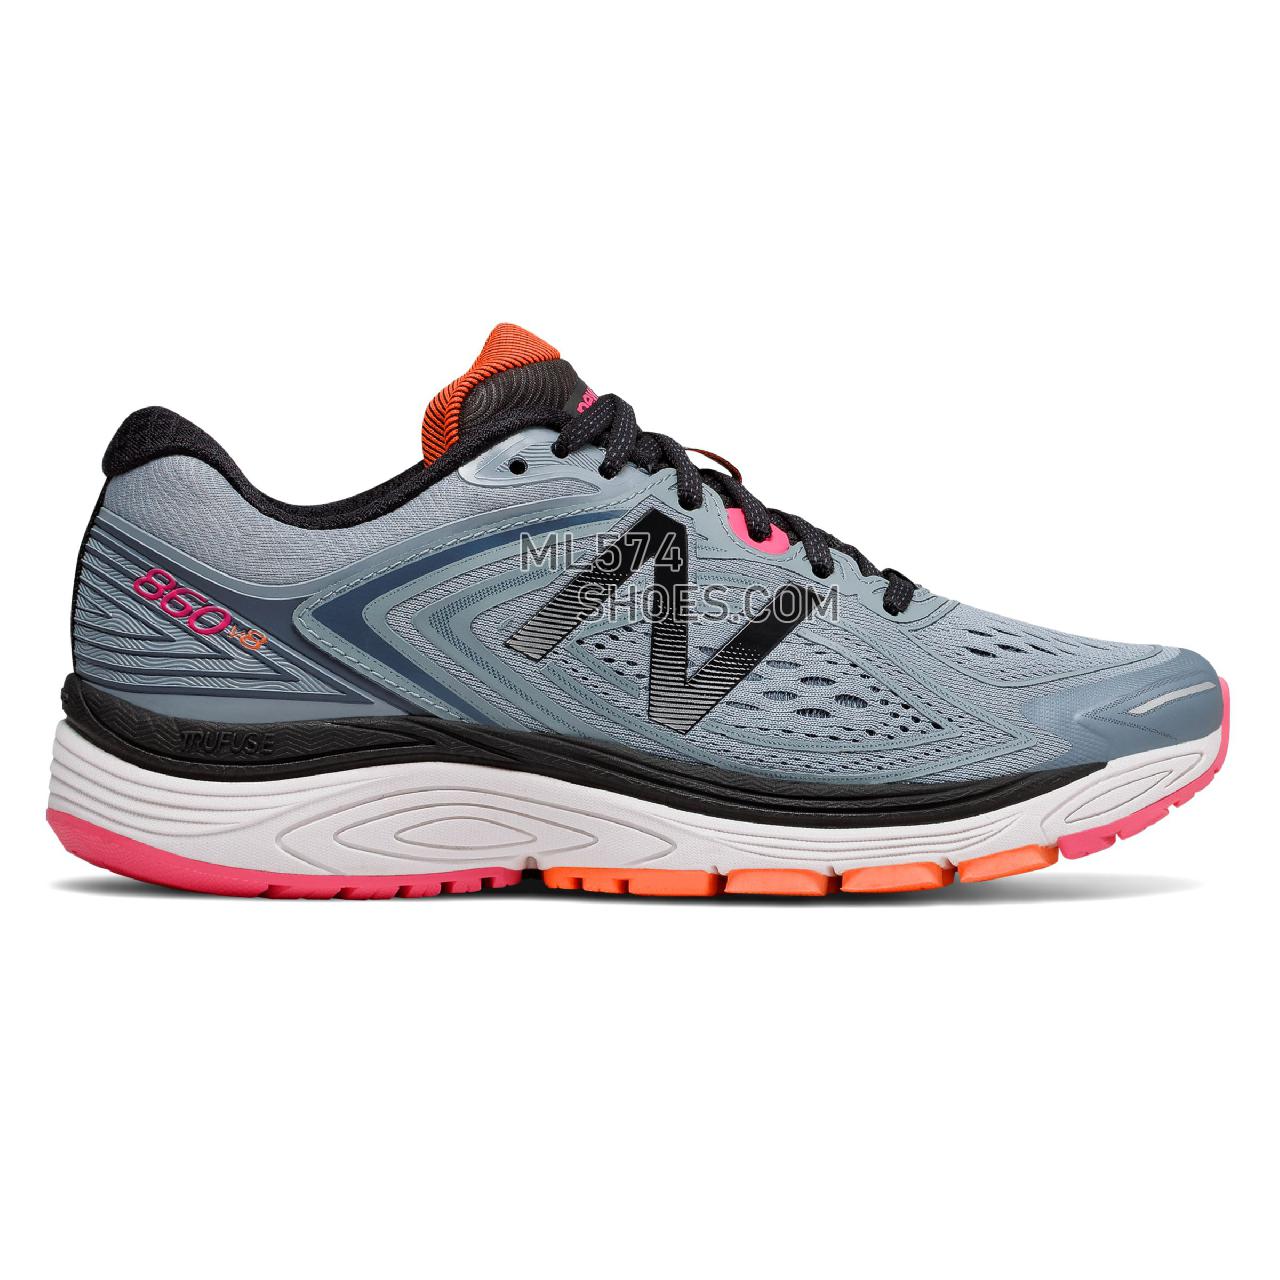 New Balance 860v8 - Women's 860 - Running Reflection with Alpha Pink and Black - W860GP8